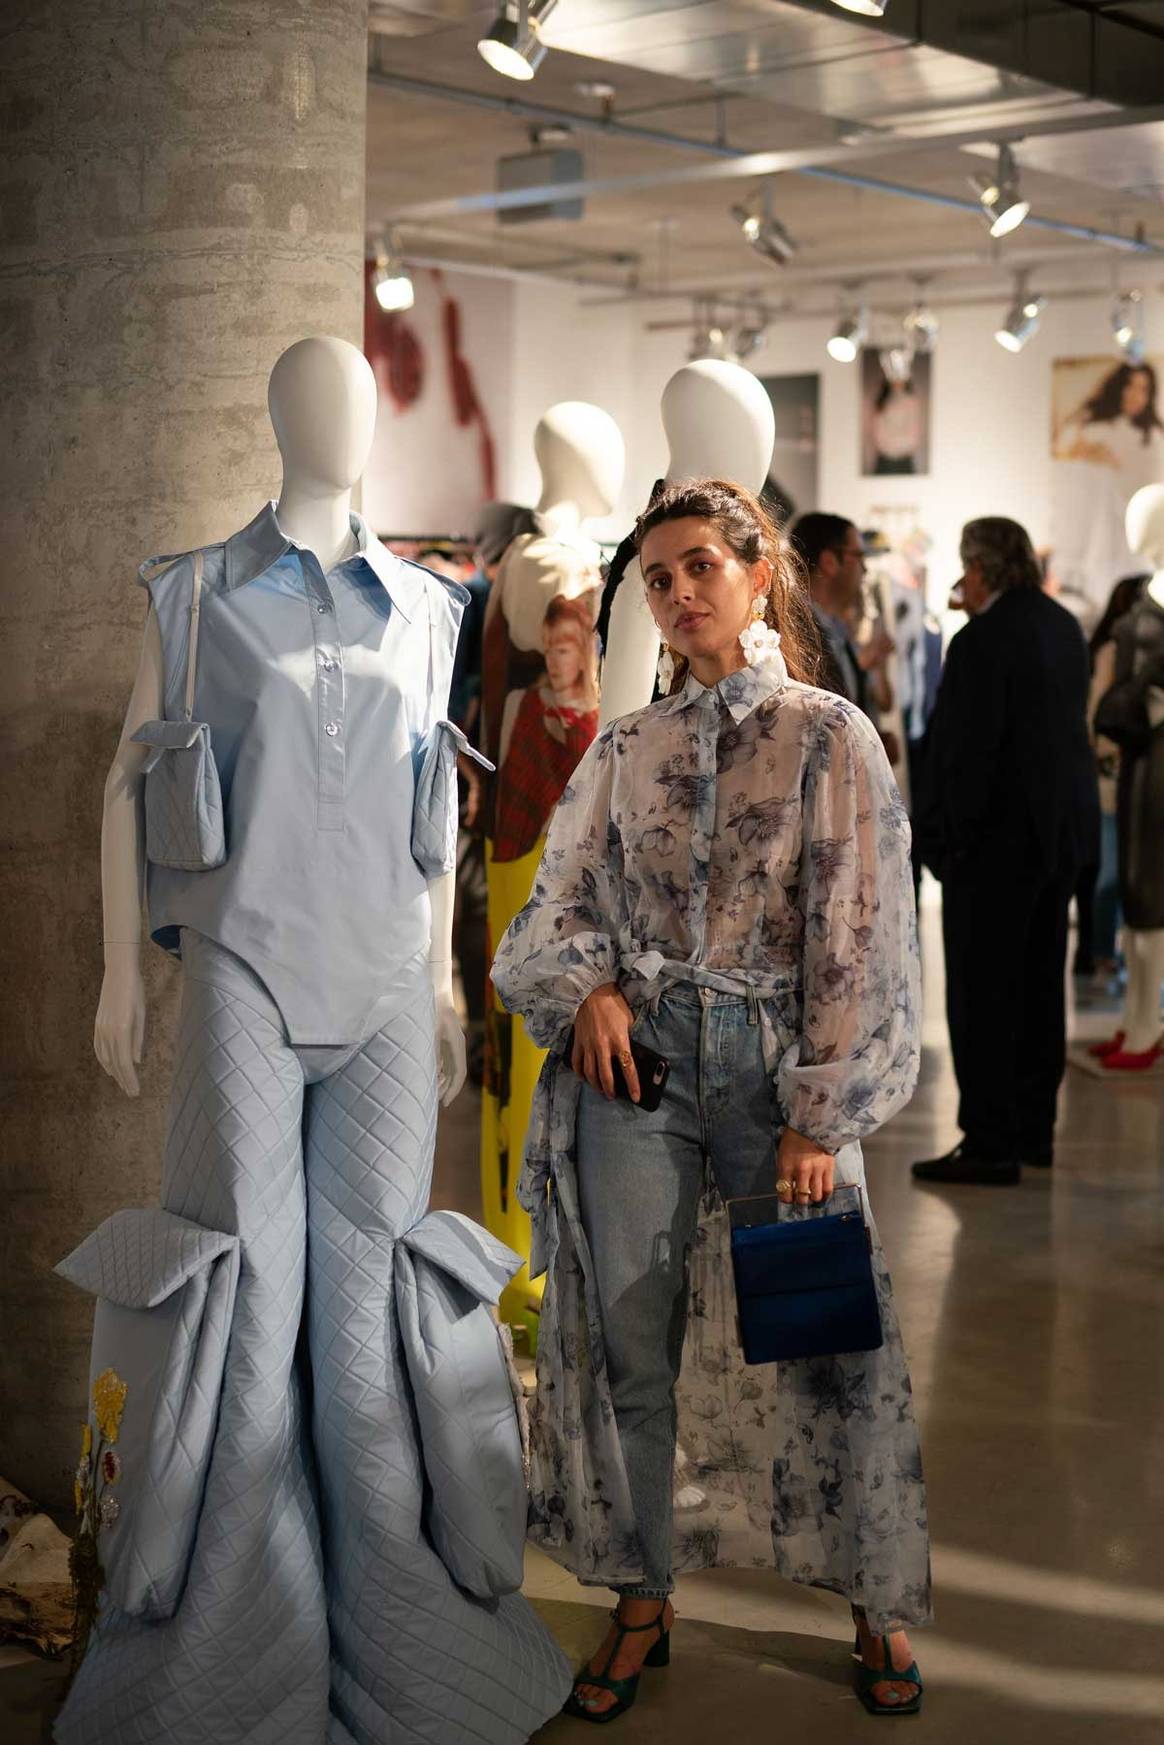 In Pictures: 2019 Exhibition of Parsons MFA Fashion Design & Society